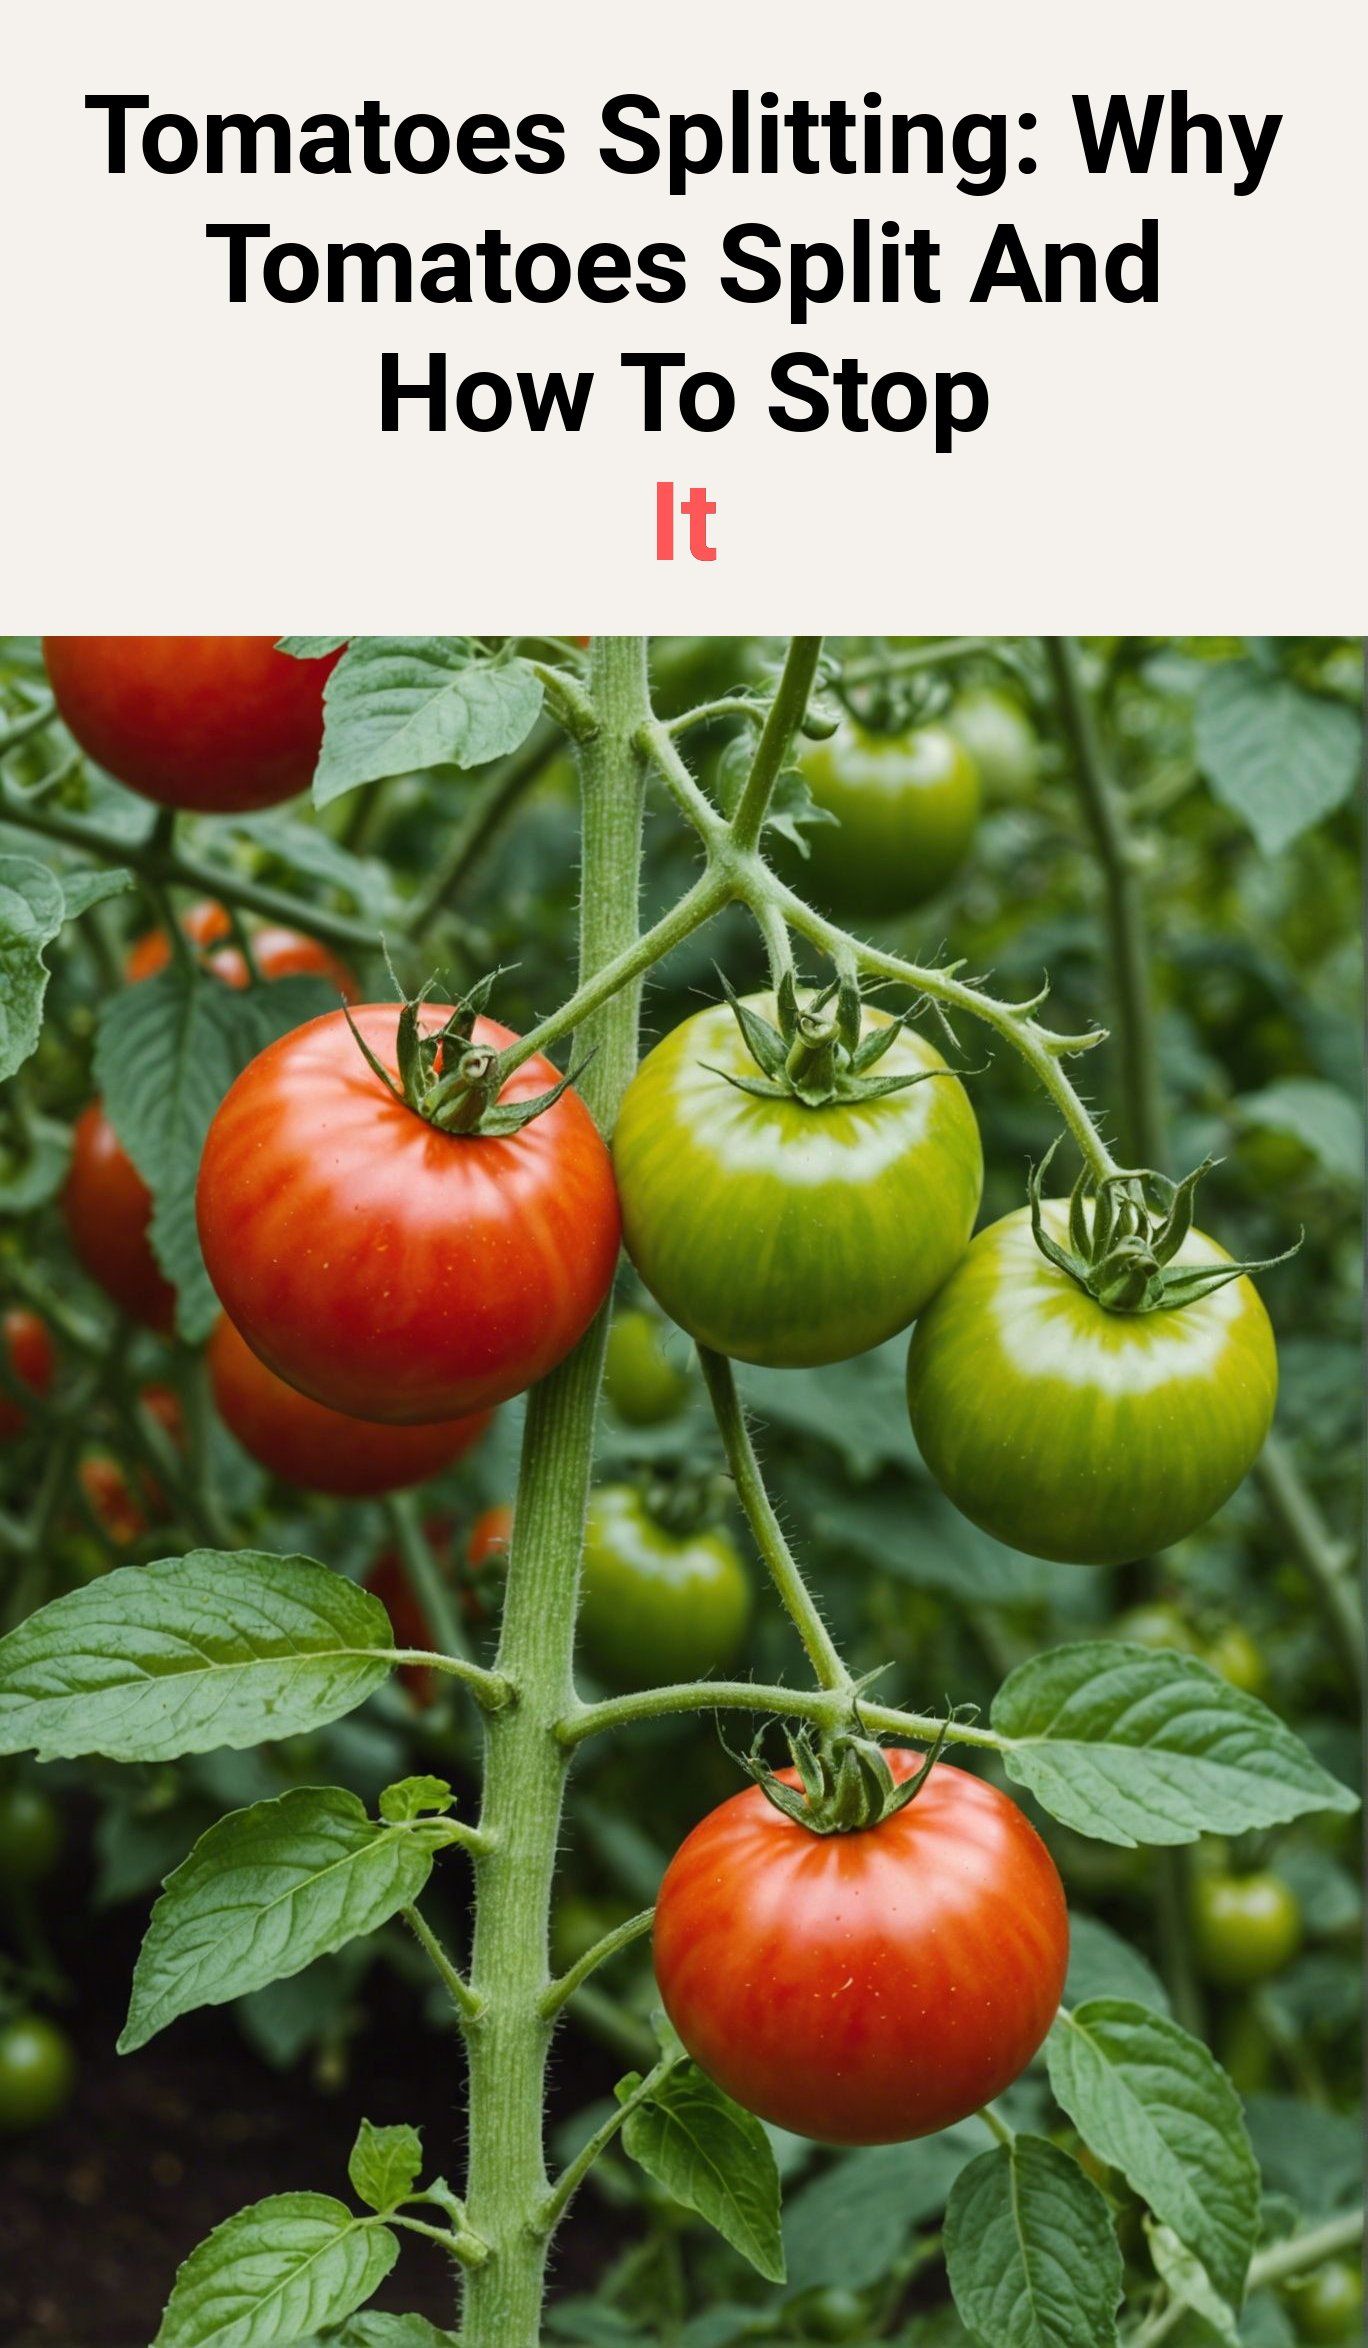 Tomatoes Splitting: Why Tomatoes Split And How To Stop It